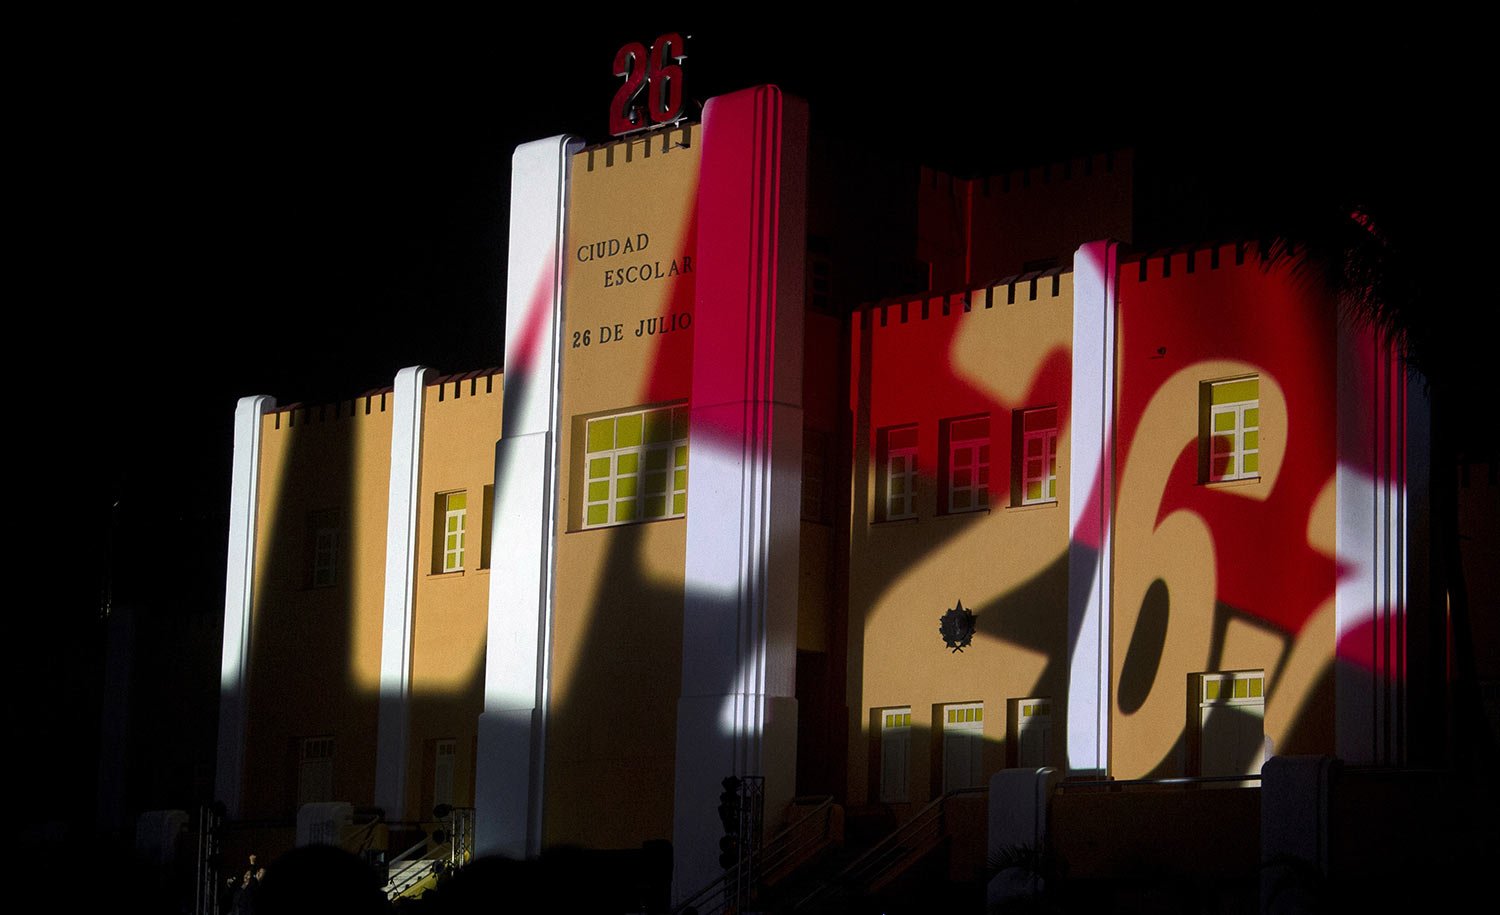  The Moncada military barracks are illuminated before sunrise during a ceremony marking the 70th anniversary of the assault on the barracks, now a school, in Santiago, Cuba, Wednesday, July 26, 2023. Cuba marks the 1953 rebel attack led by Fidel and 